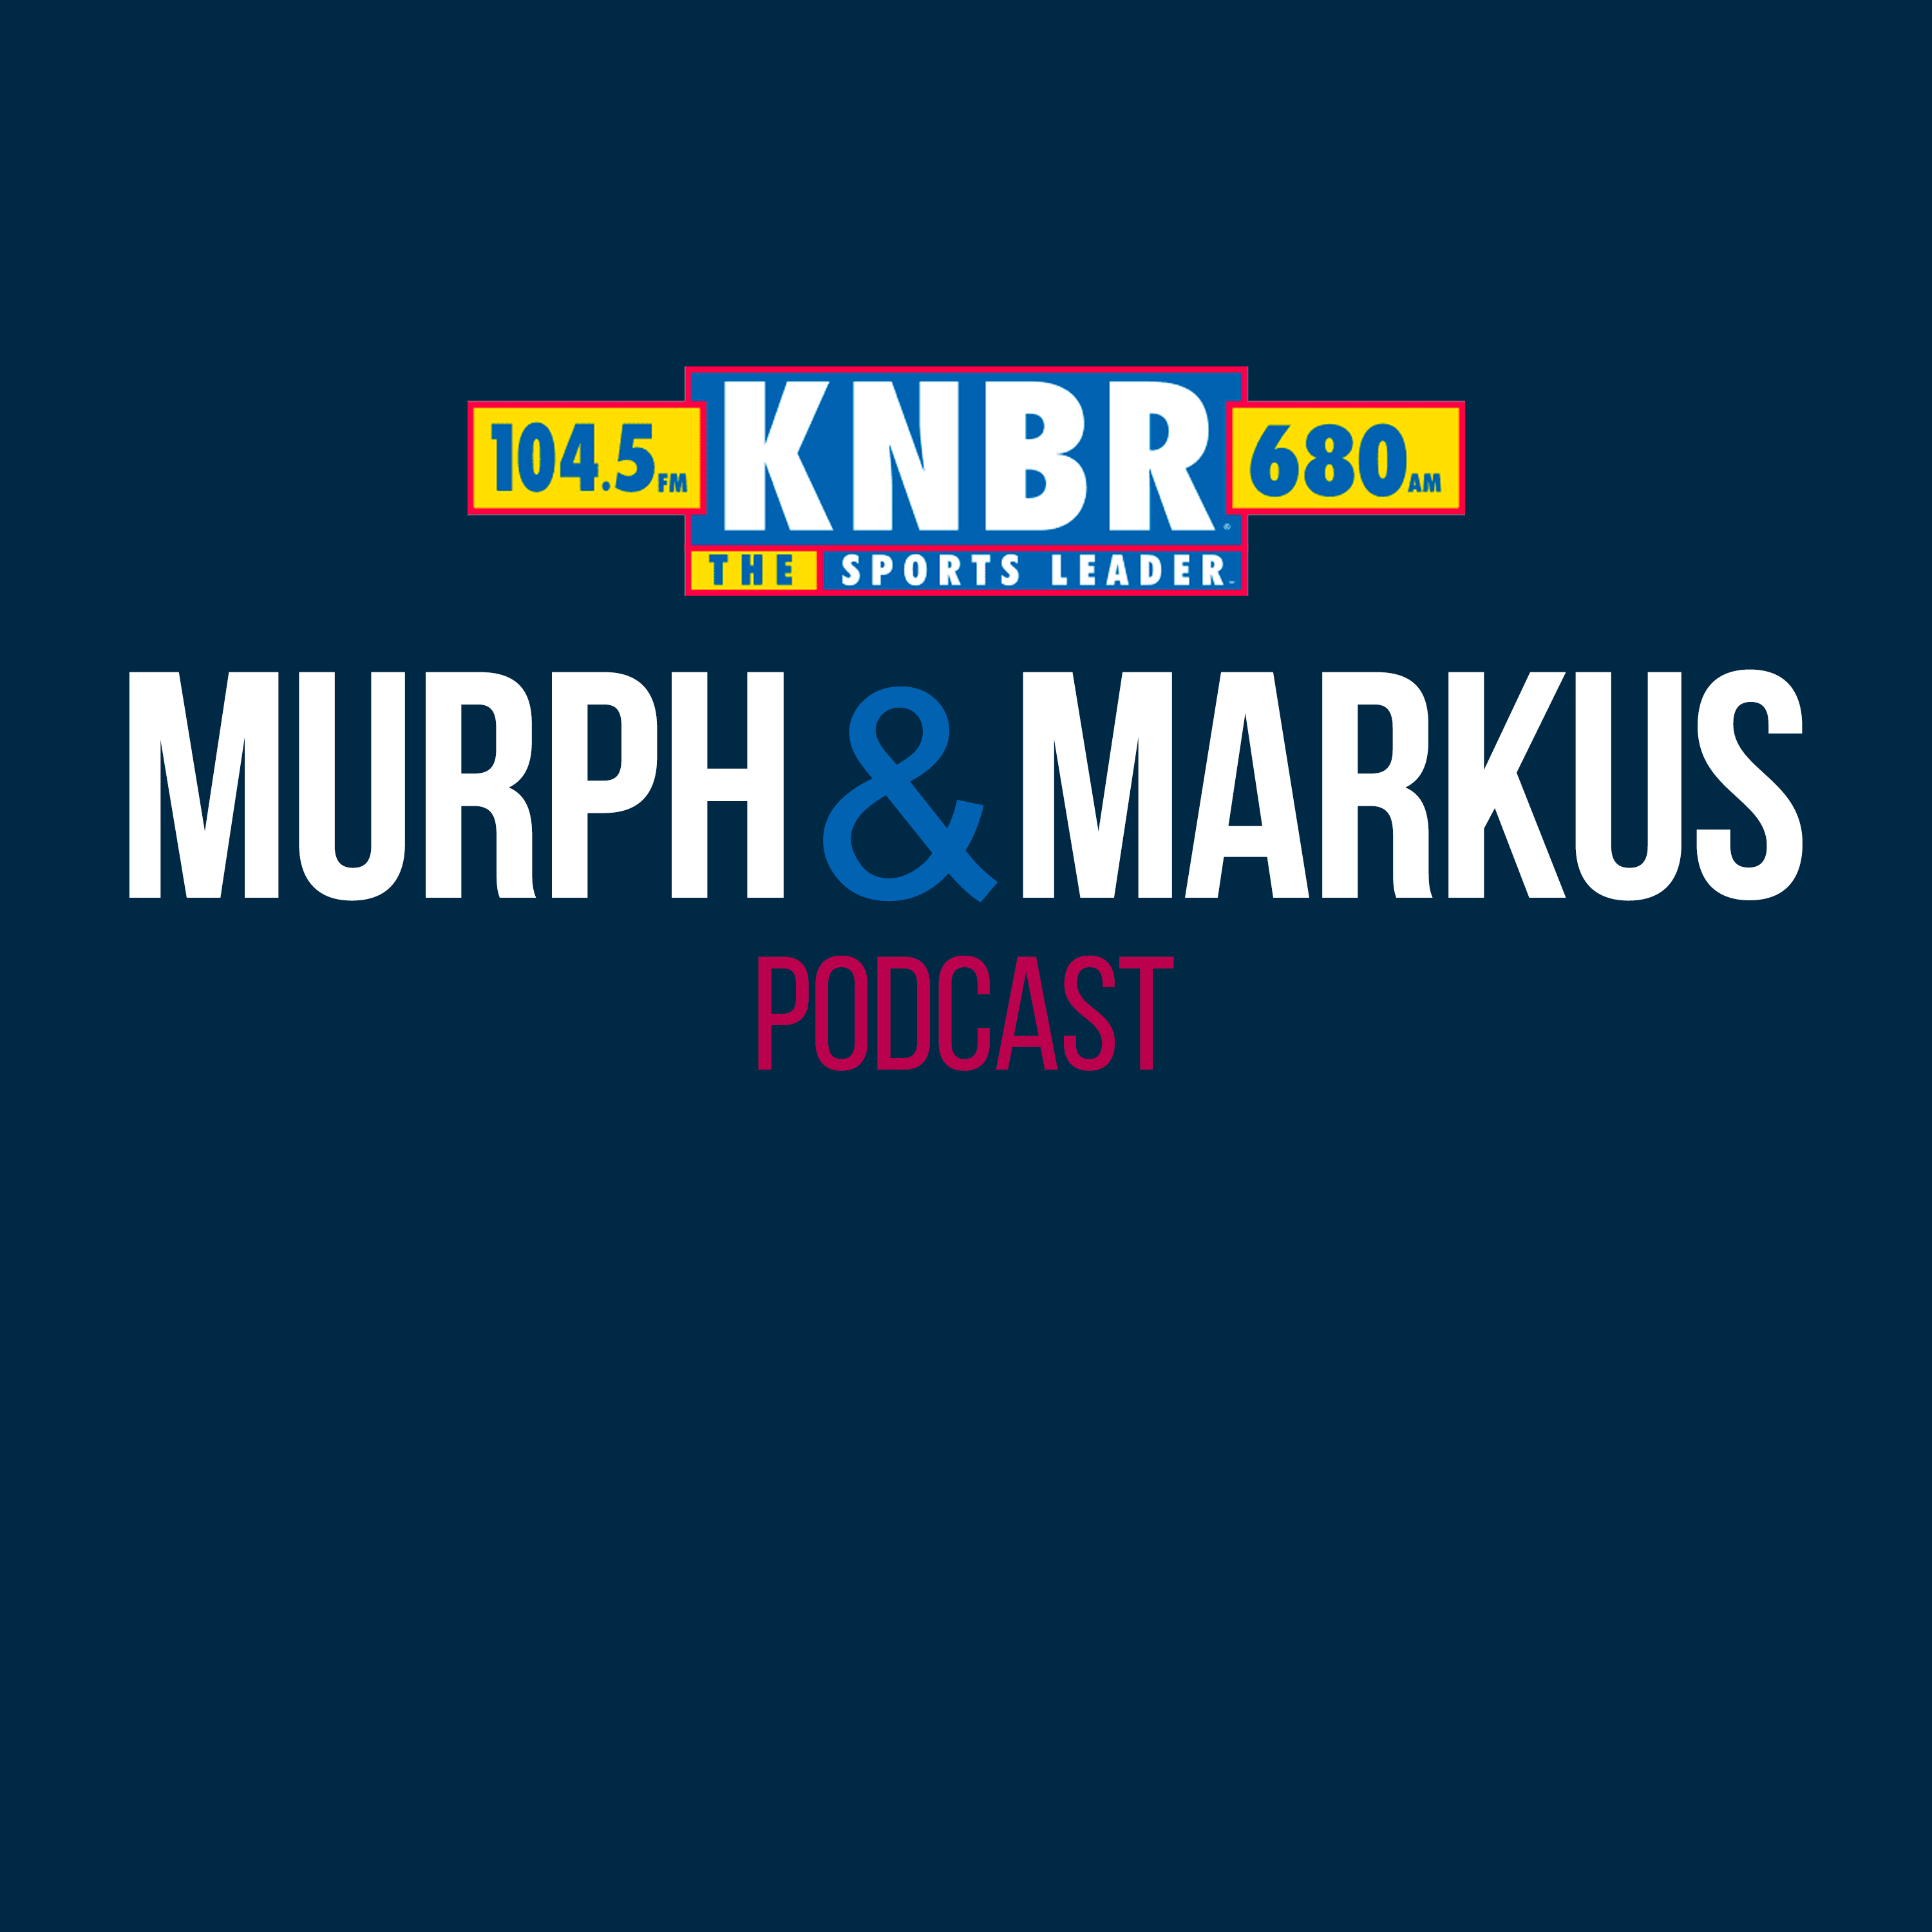 6-24 Hour 1: Murph & Markus react to the Giants five-game losing streak, discuss how the team can slow down the running game, and recap the weekend in sports with Humms & Bums